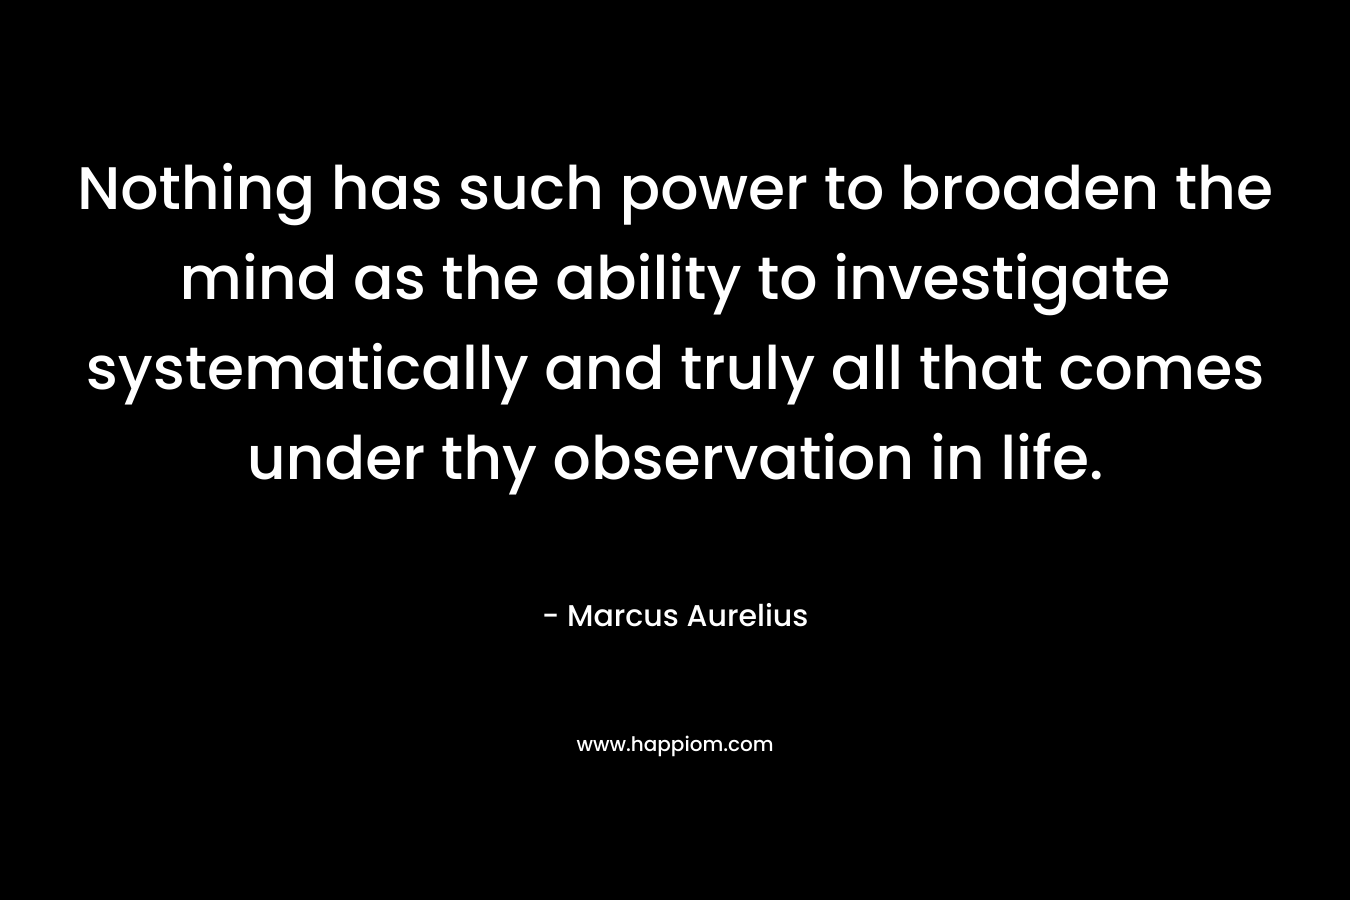 Nothing has such power to broaden the mind as the ability to investigate systematically and truly all that comes under thy observation in life.